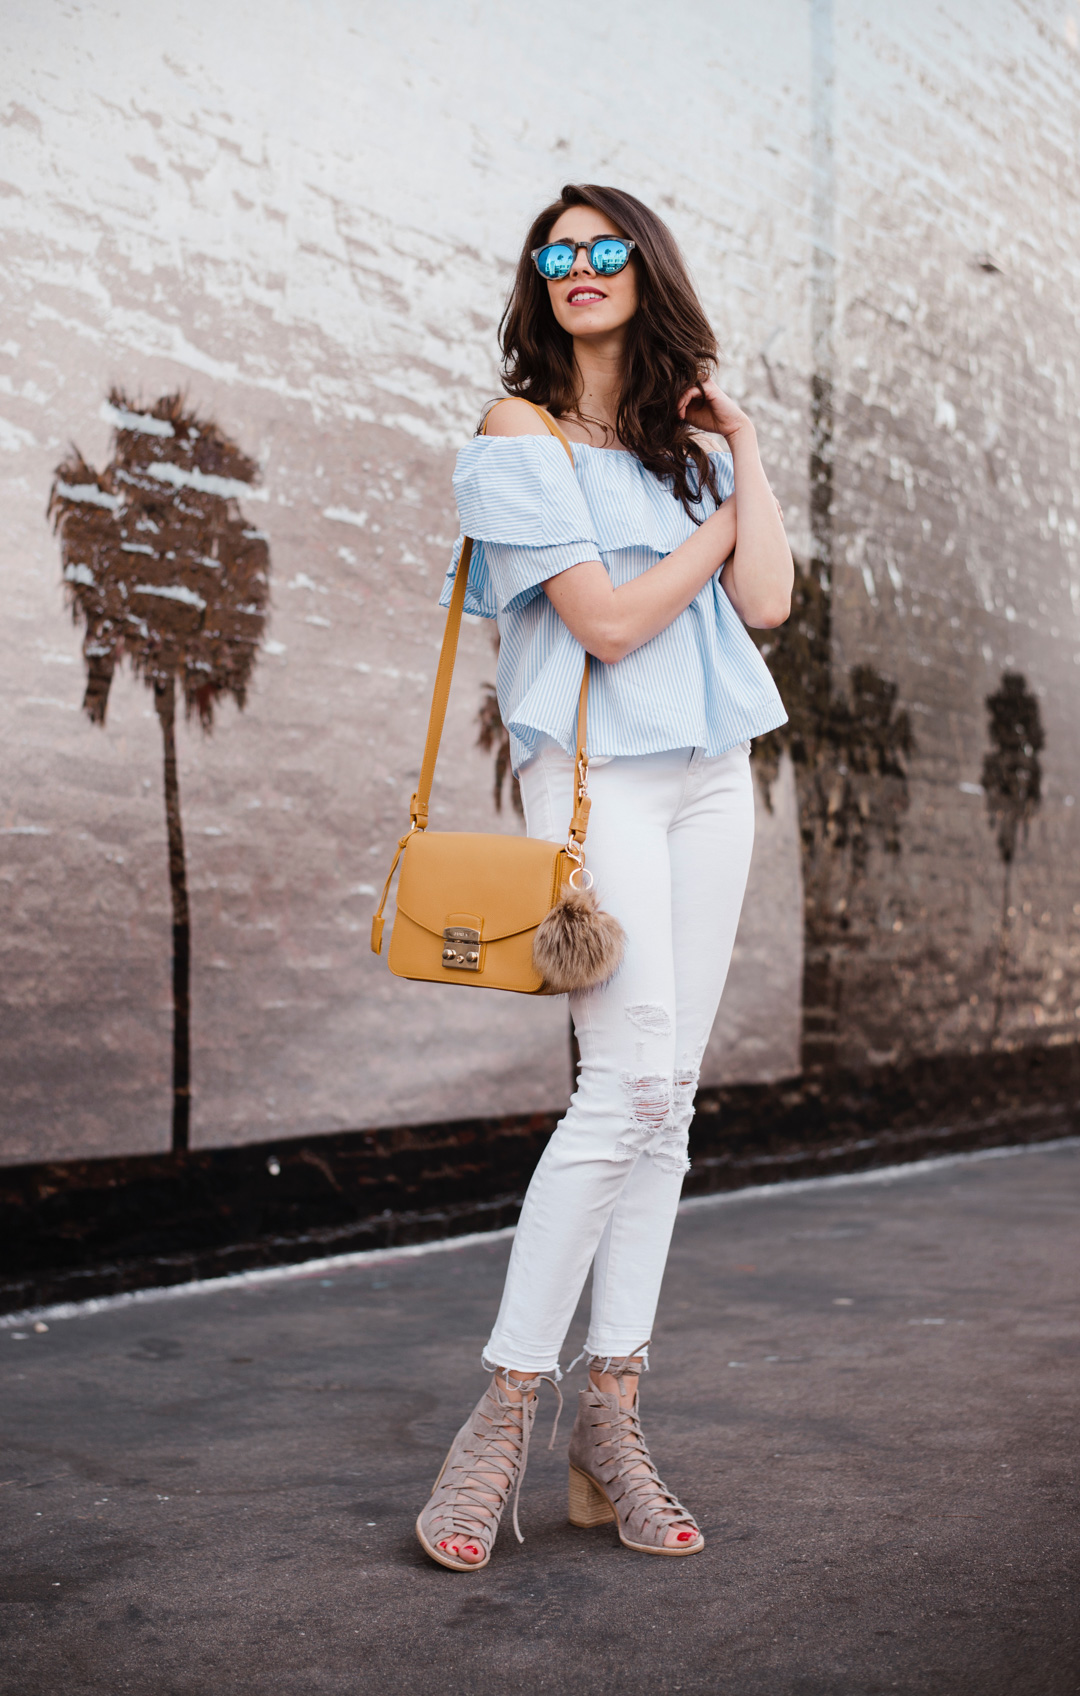 Shein off-the-shoulder top, J Brand Jeans and Taudrey Necklace , Furla bag, Illesteva sunglasses, Jefferey Campbell Shoes